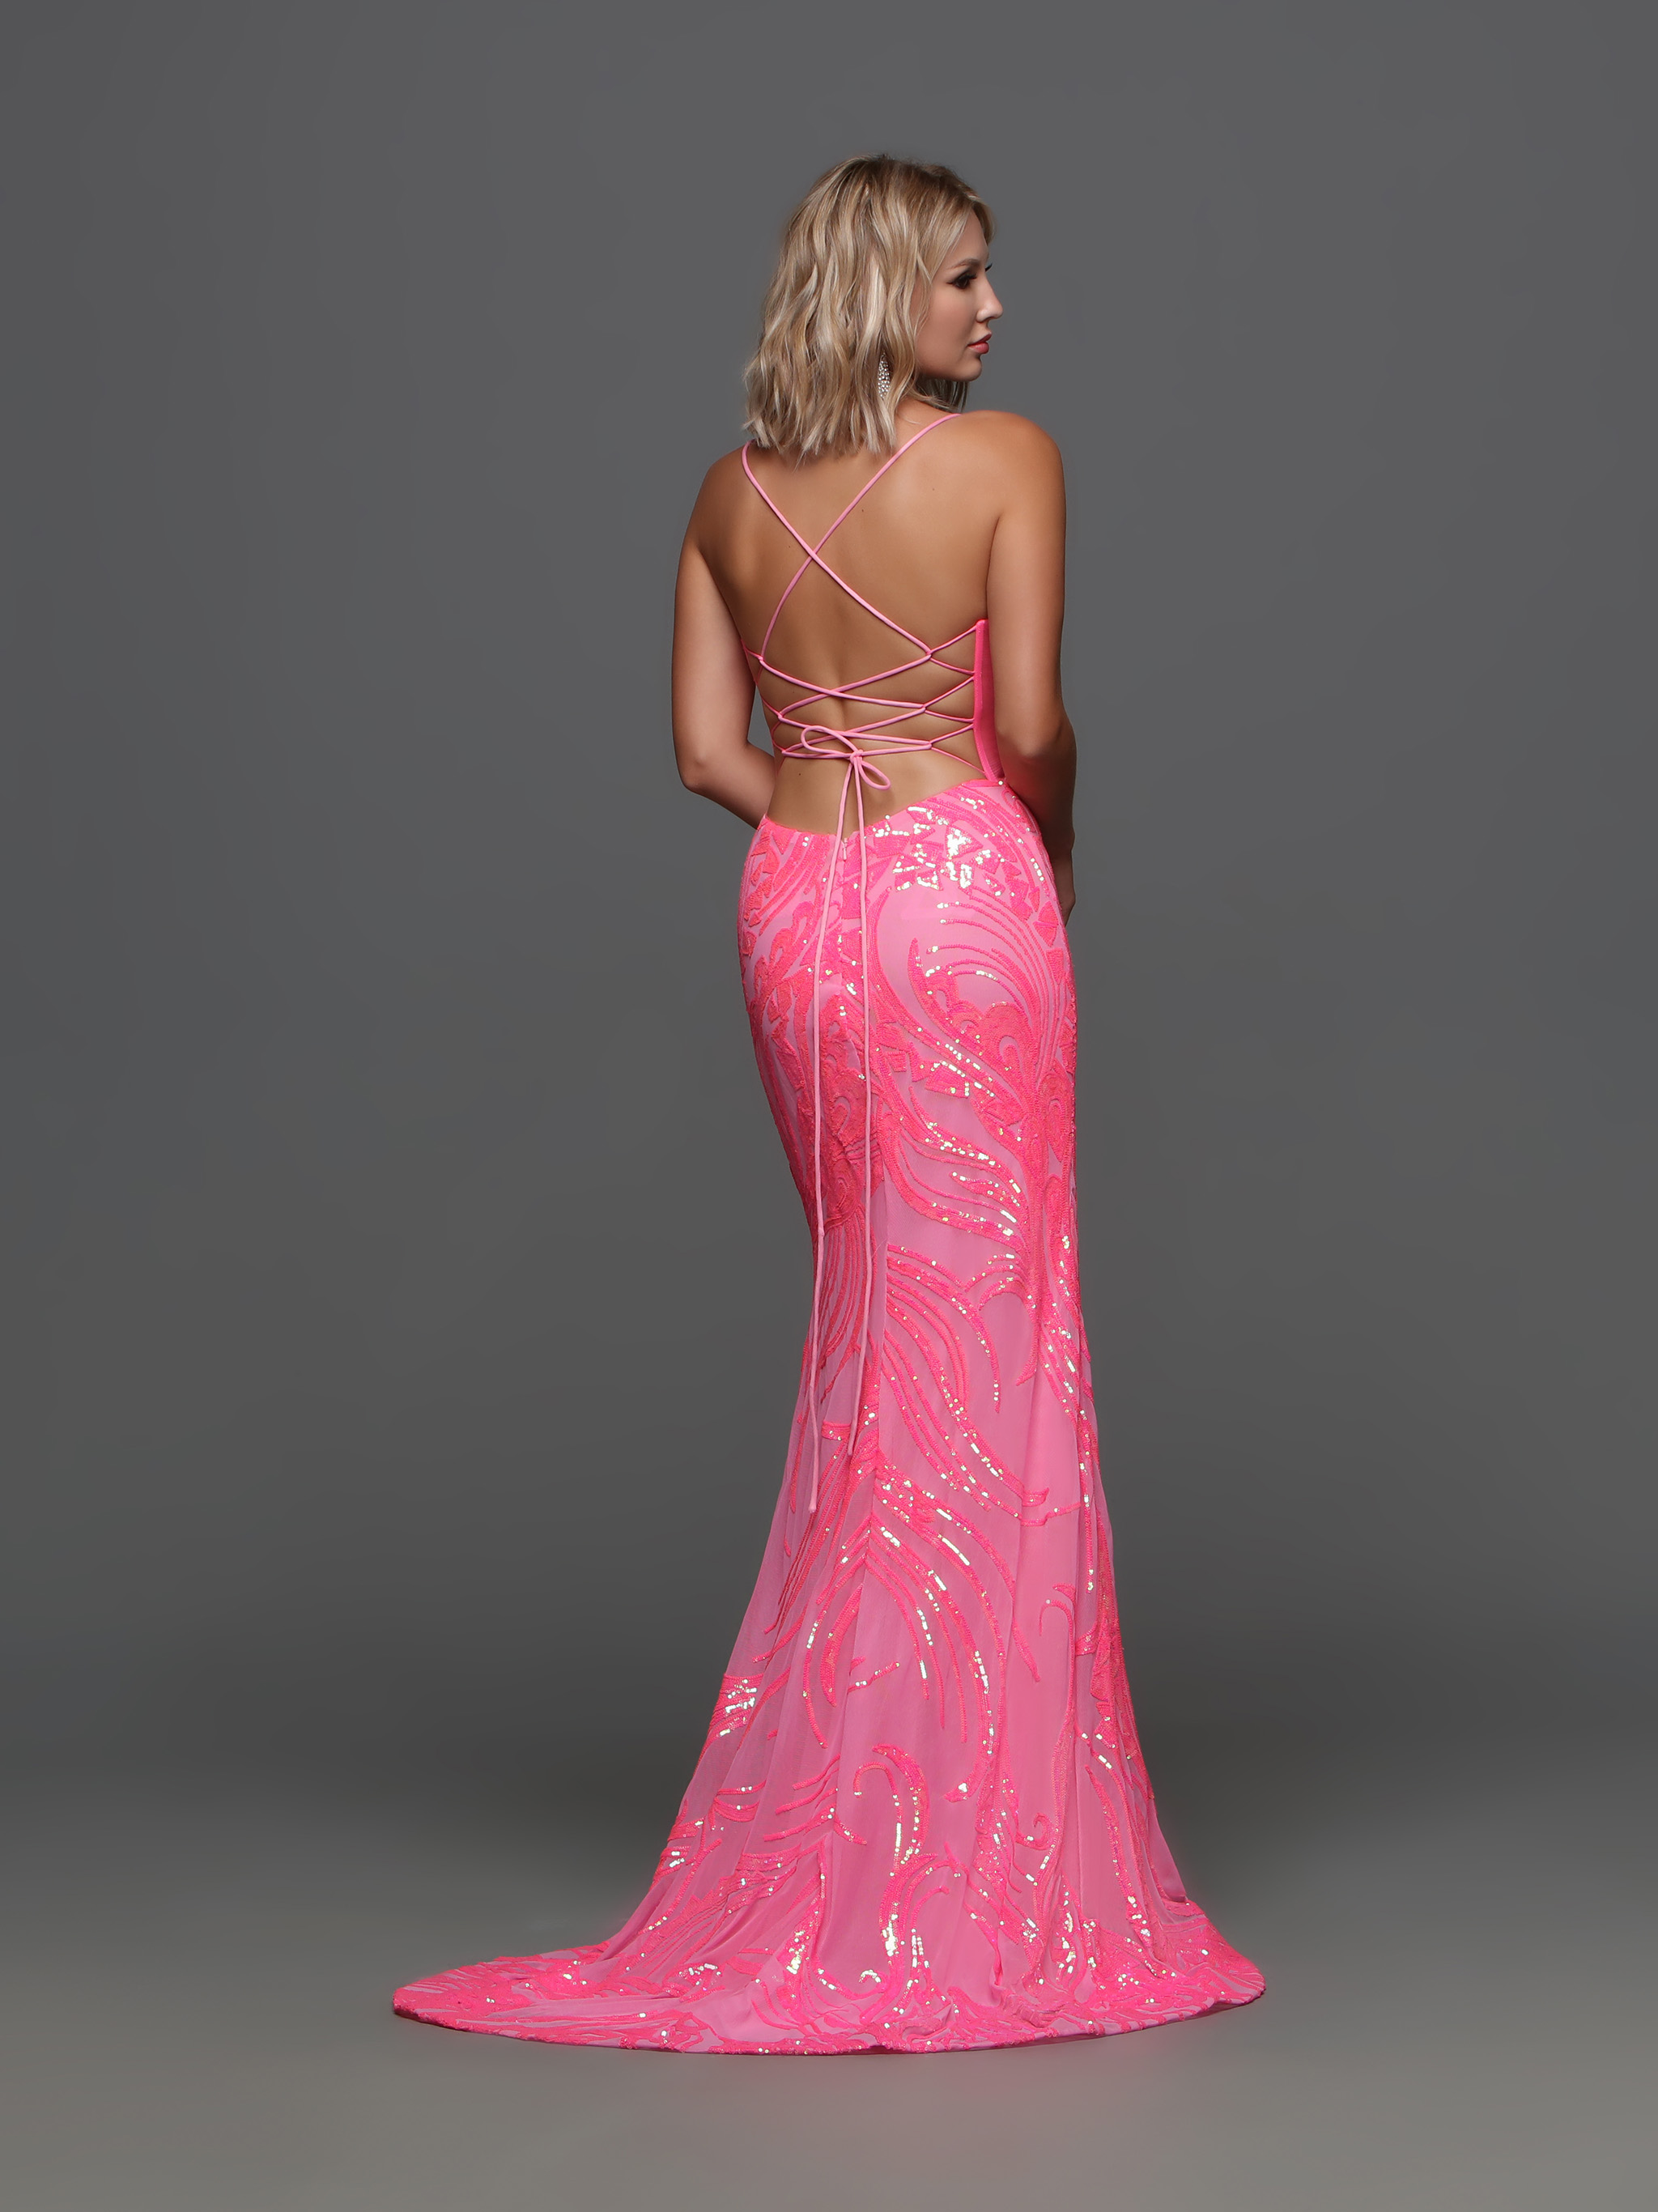 Image showing back view of style #72328